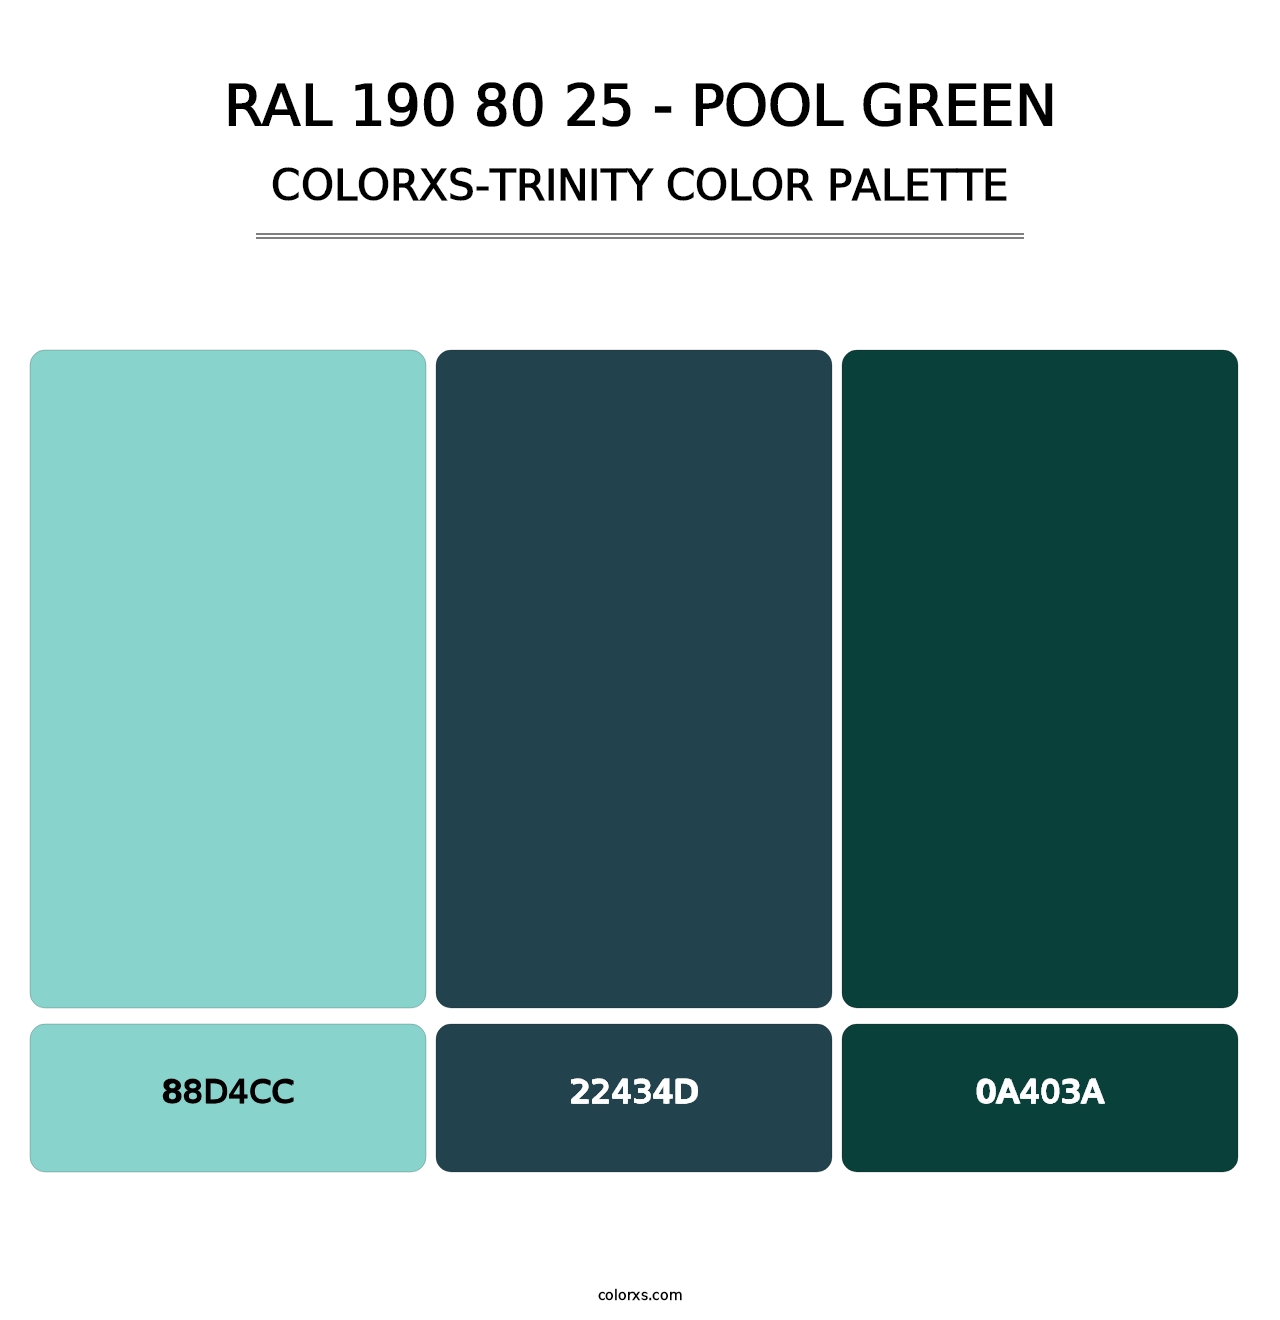 RAL 190 80 25 - Pool Green - Colorxs Trinity Palette